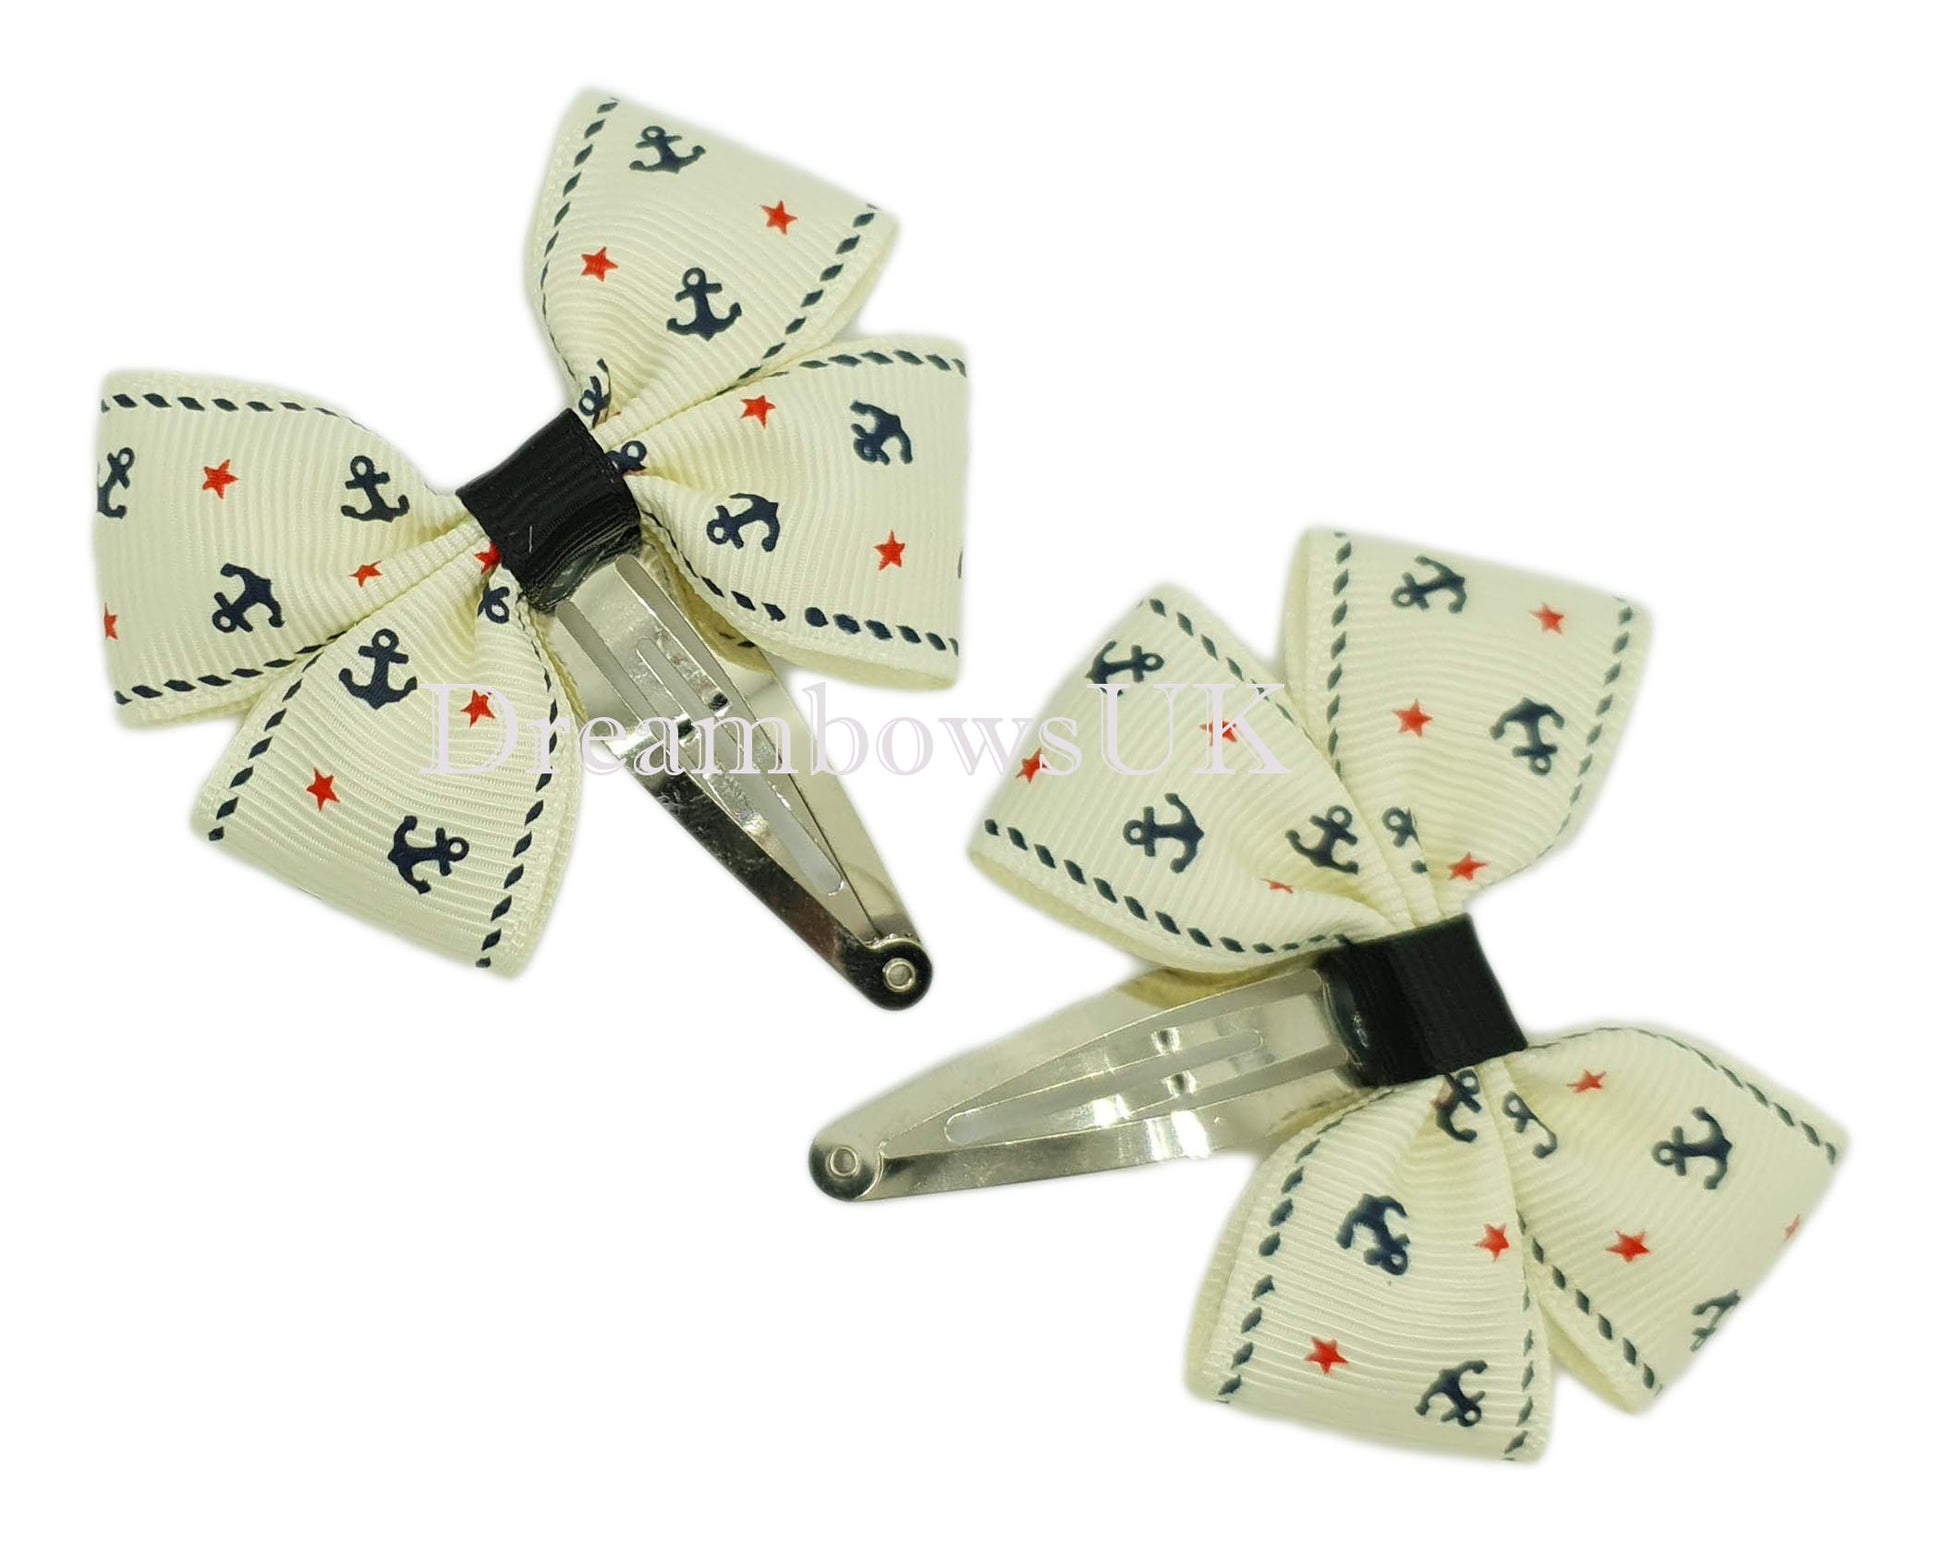 Cream Anchor Novelty Design Hair Bows on Snap Clips - Unique Accessories for Girls